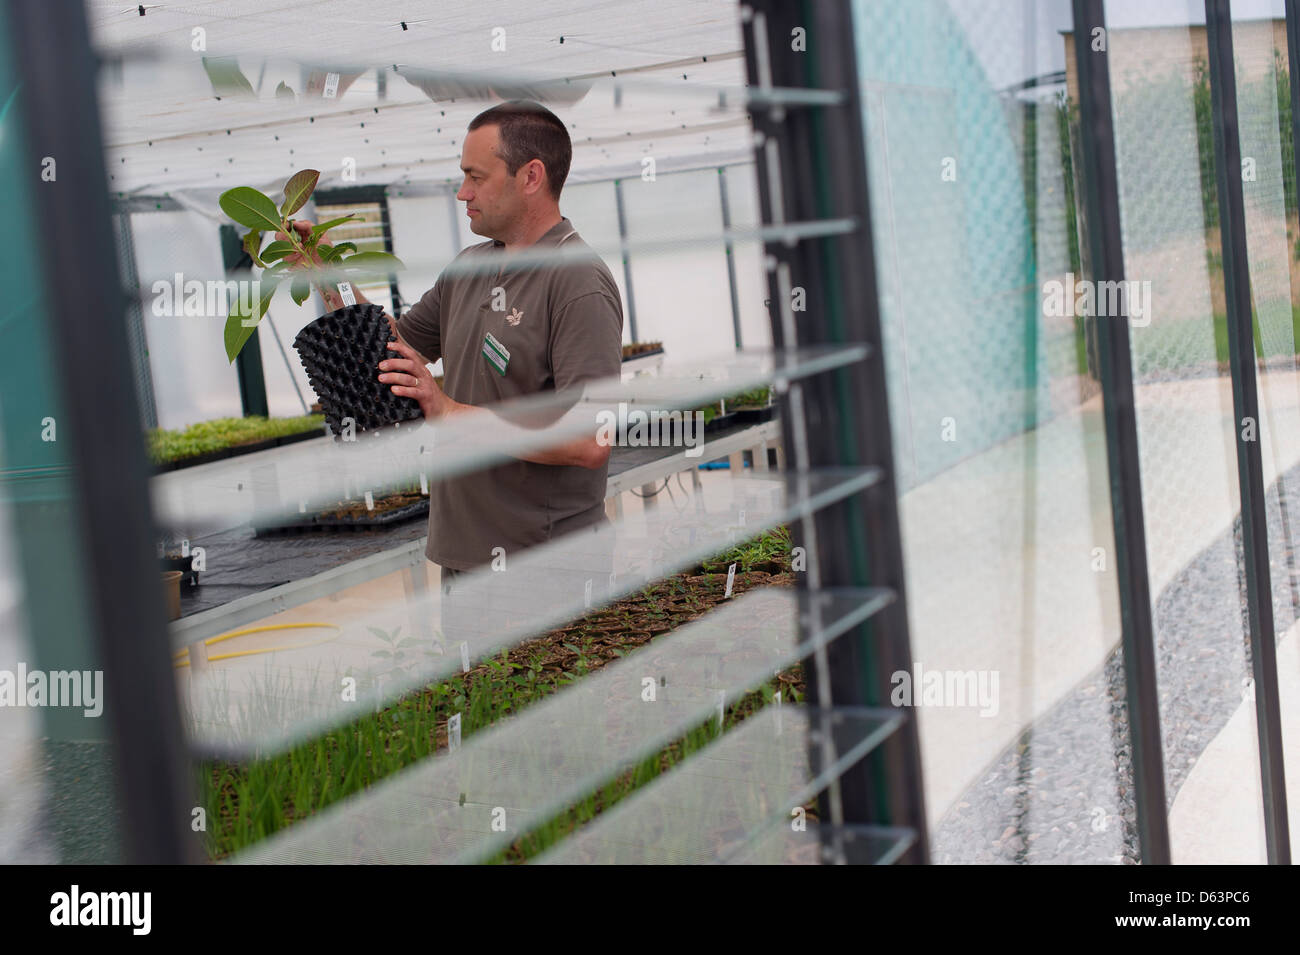 A man working in a green house, in a plant nursery gardening Stock Photo